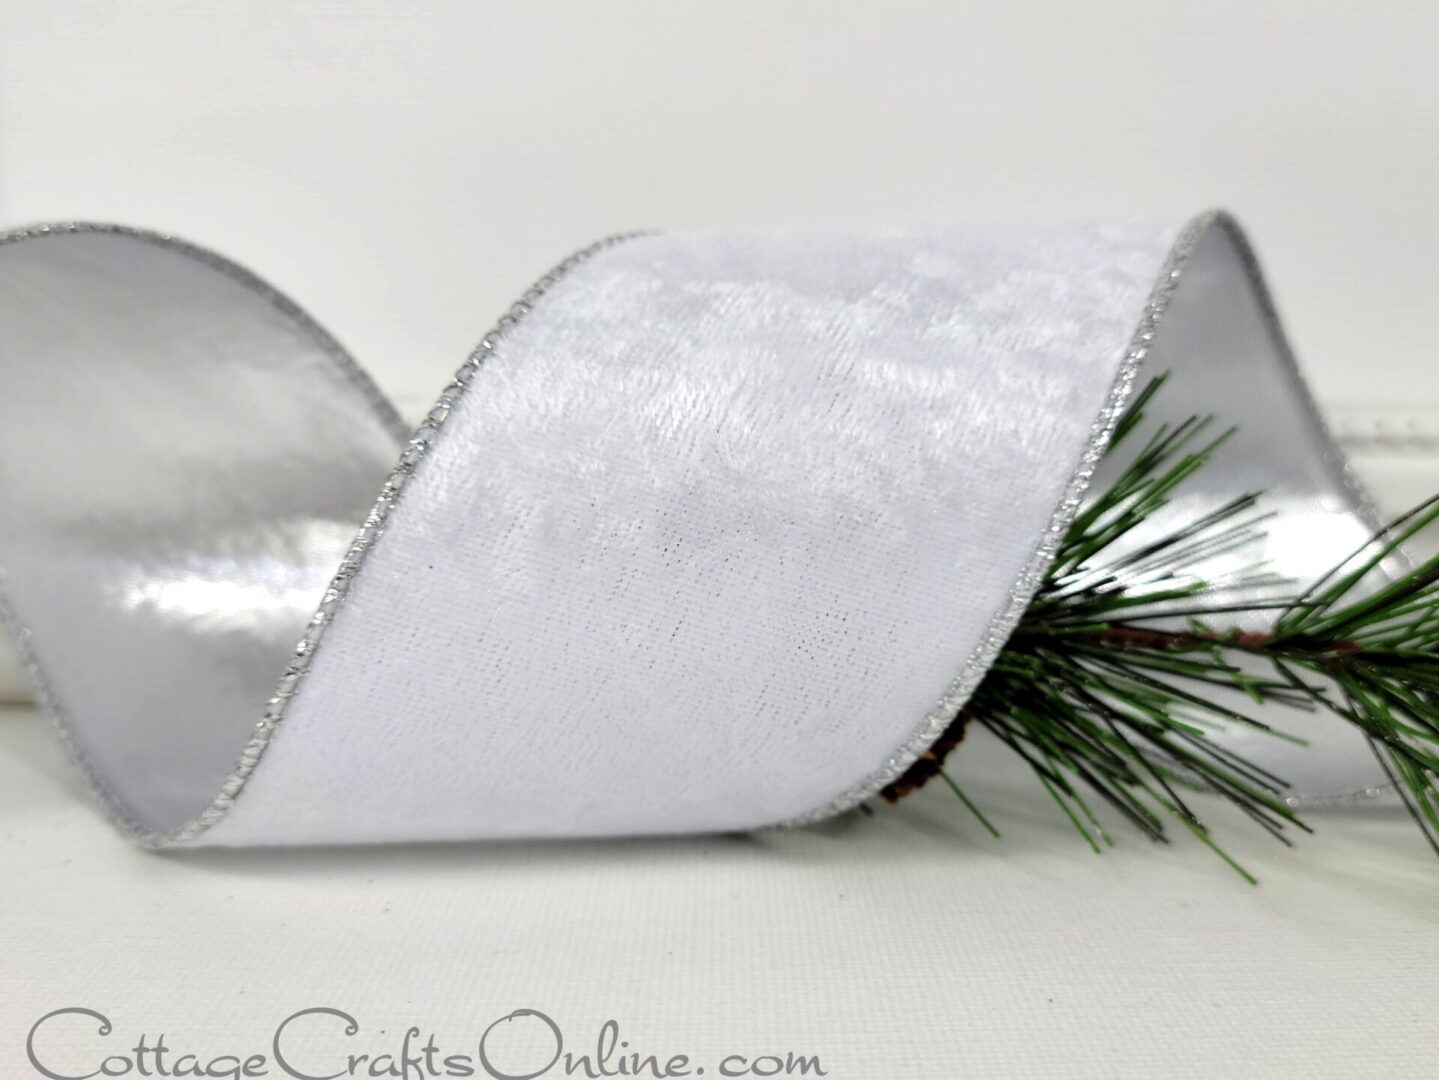 A white ribbon with silver trim and pine needles.